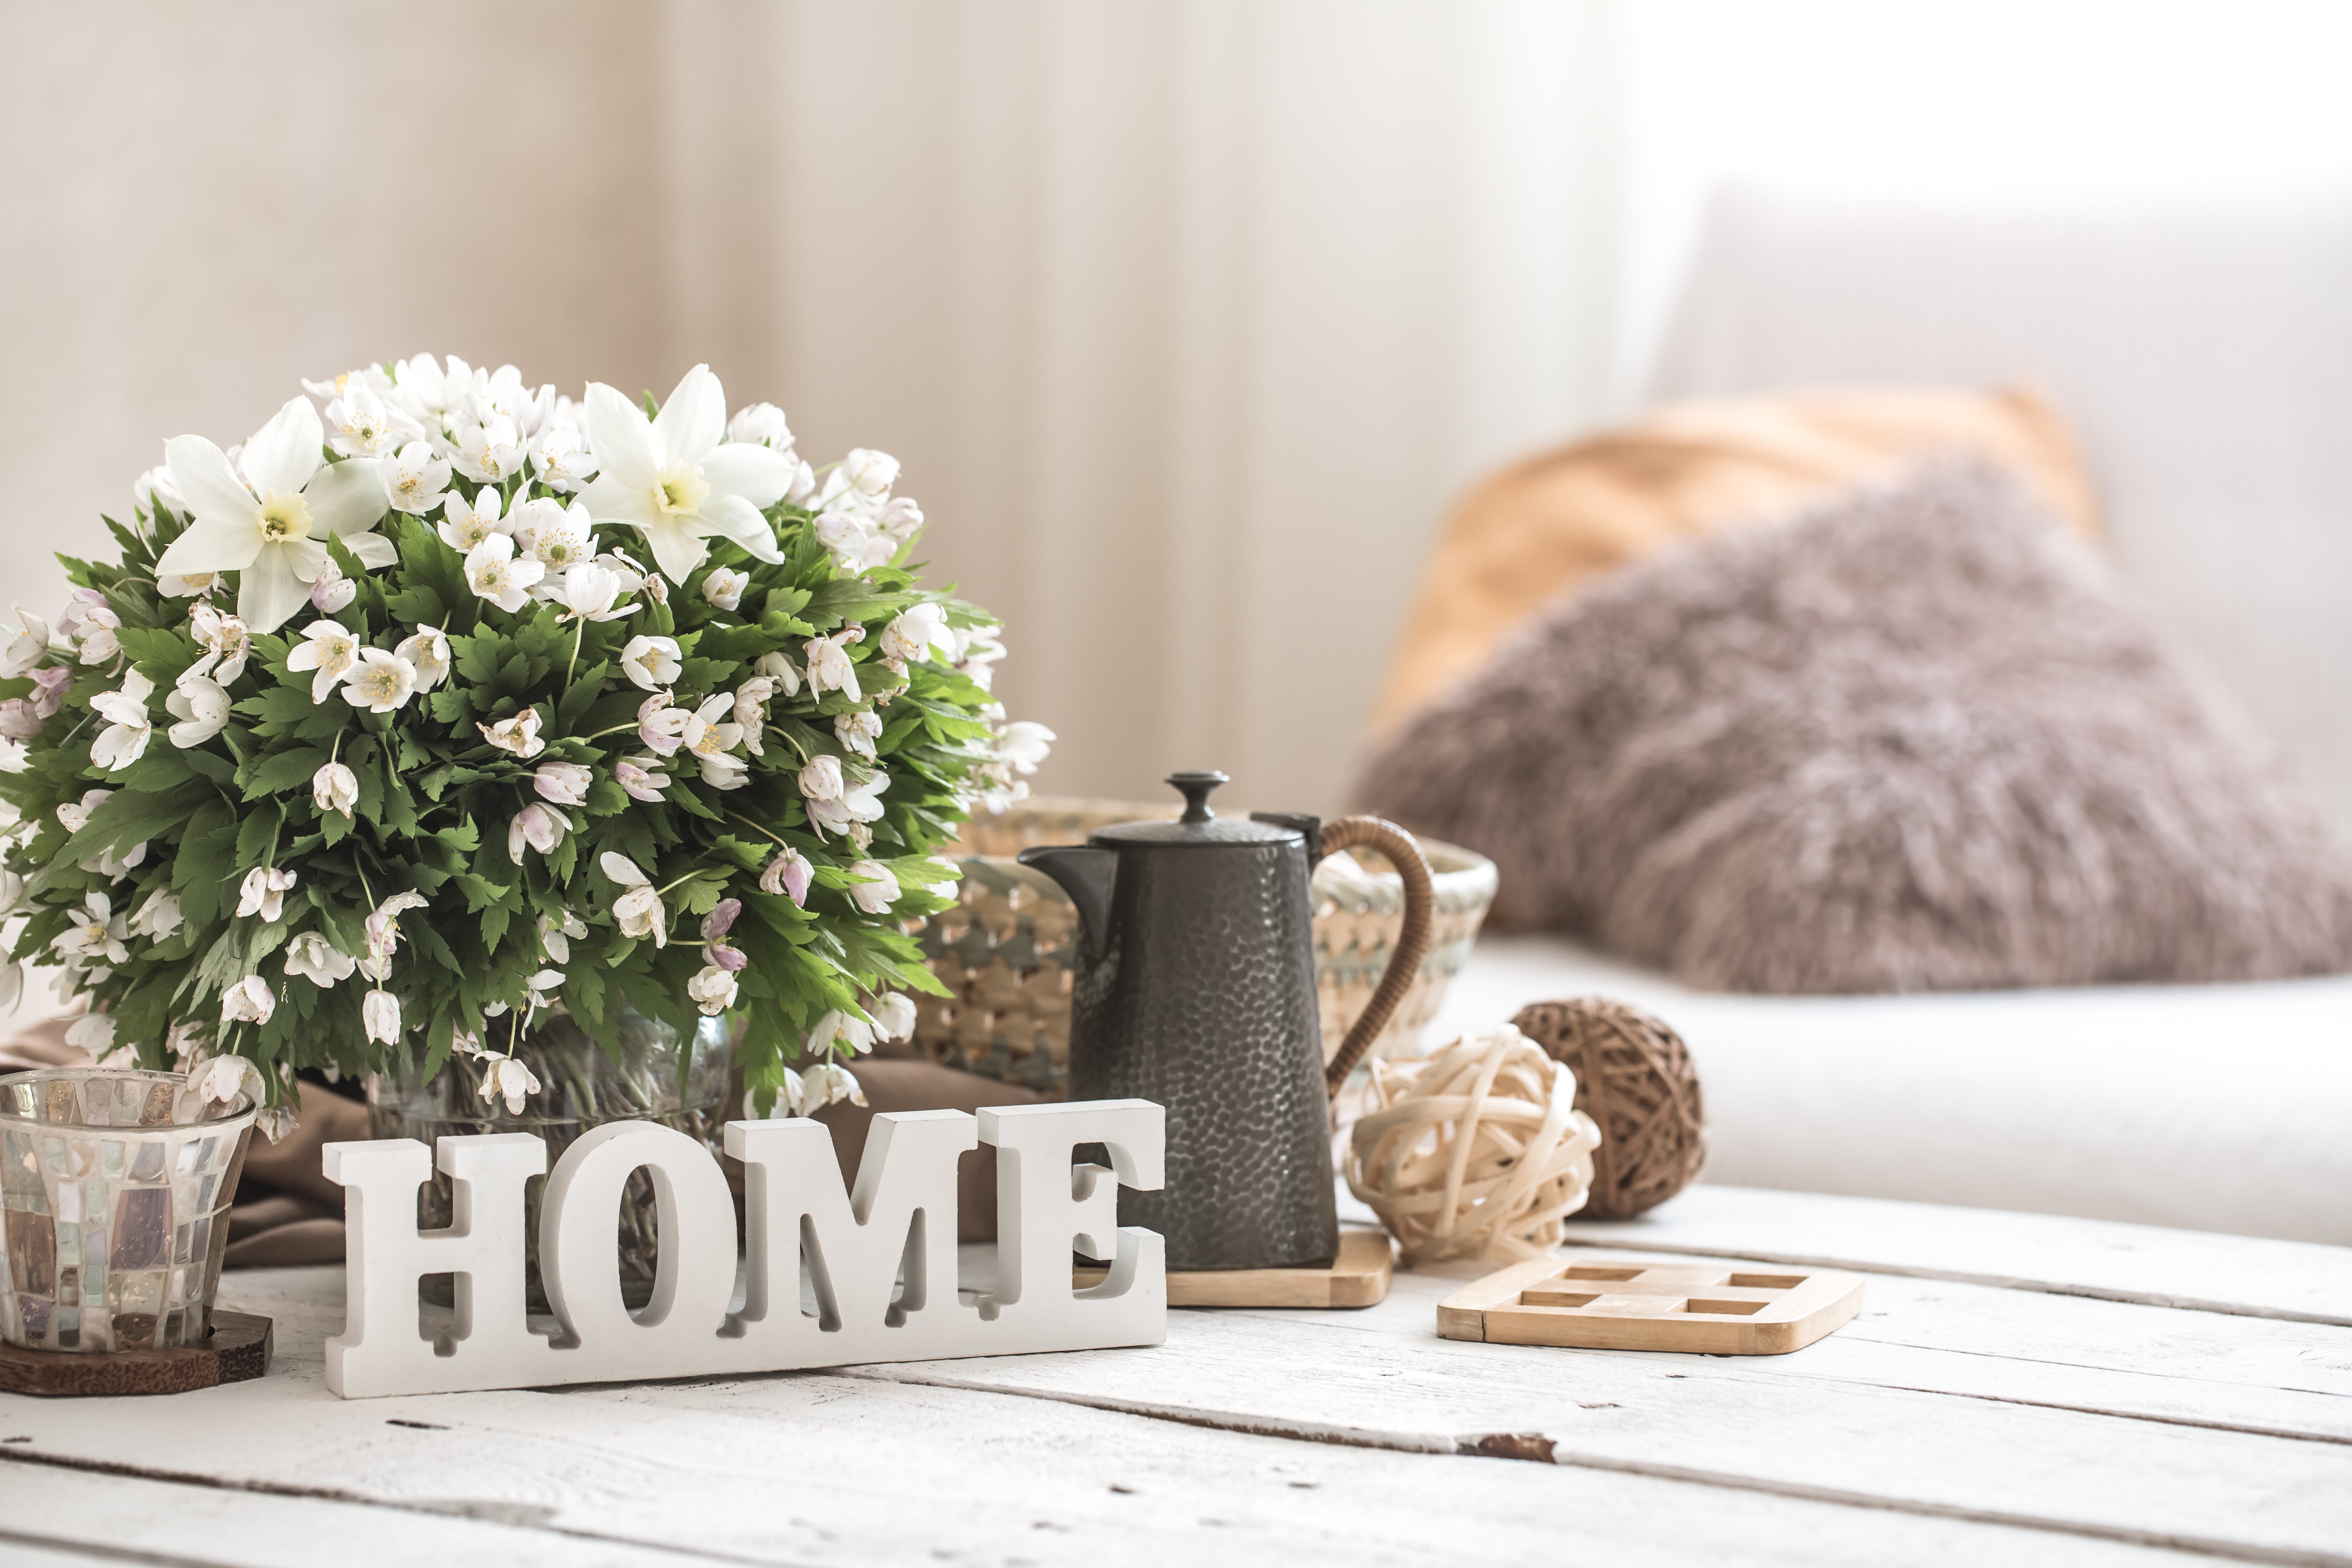 Upping the Coziness Factor In Your Home